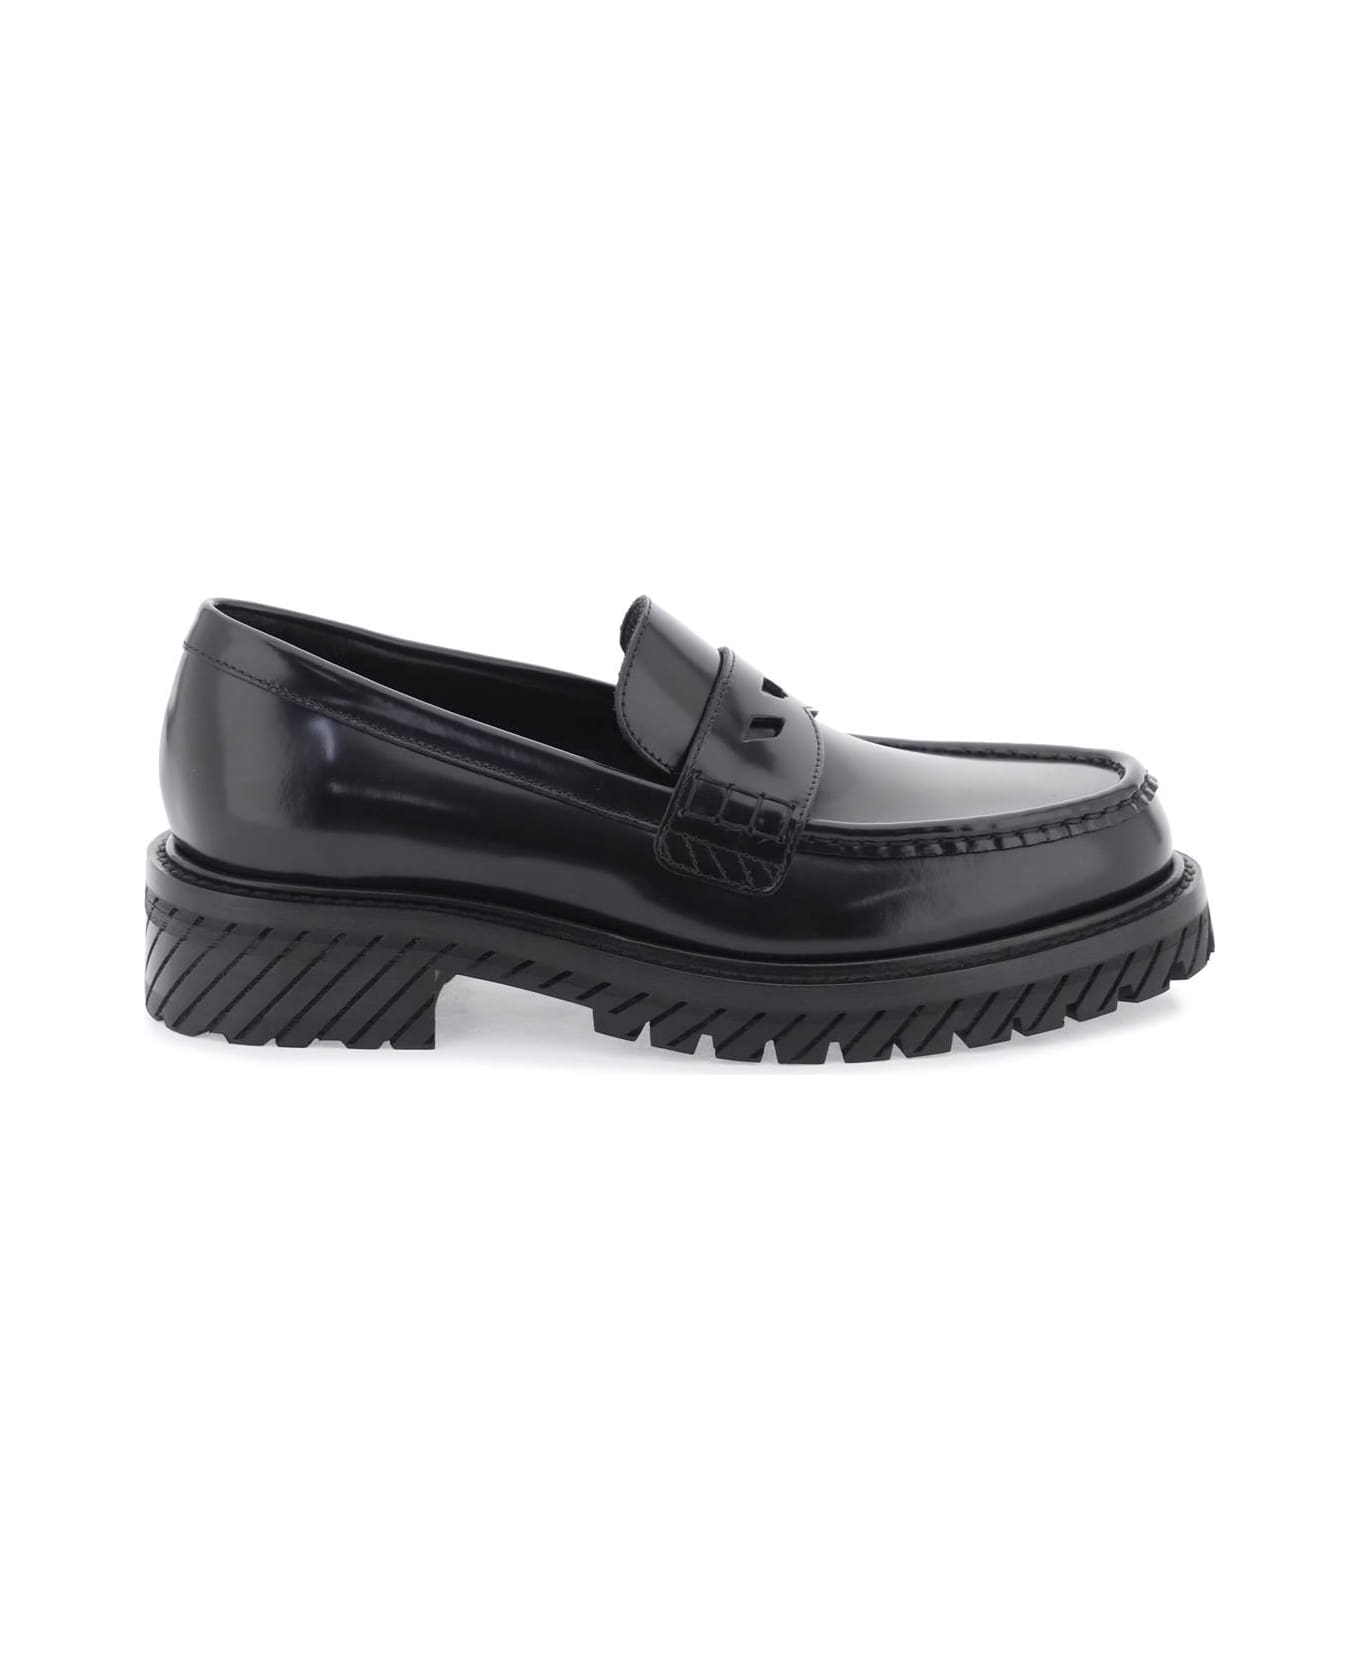 Off-White Leather Loafers - BLACK BLACK (Metallic)